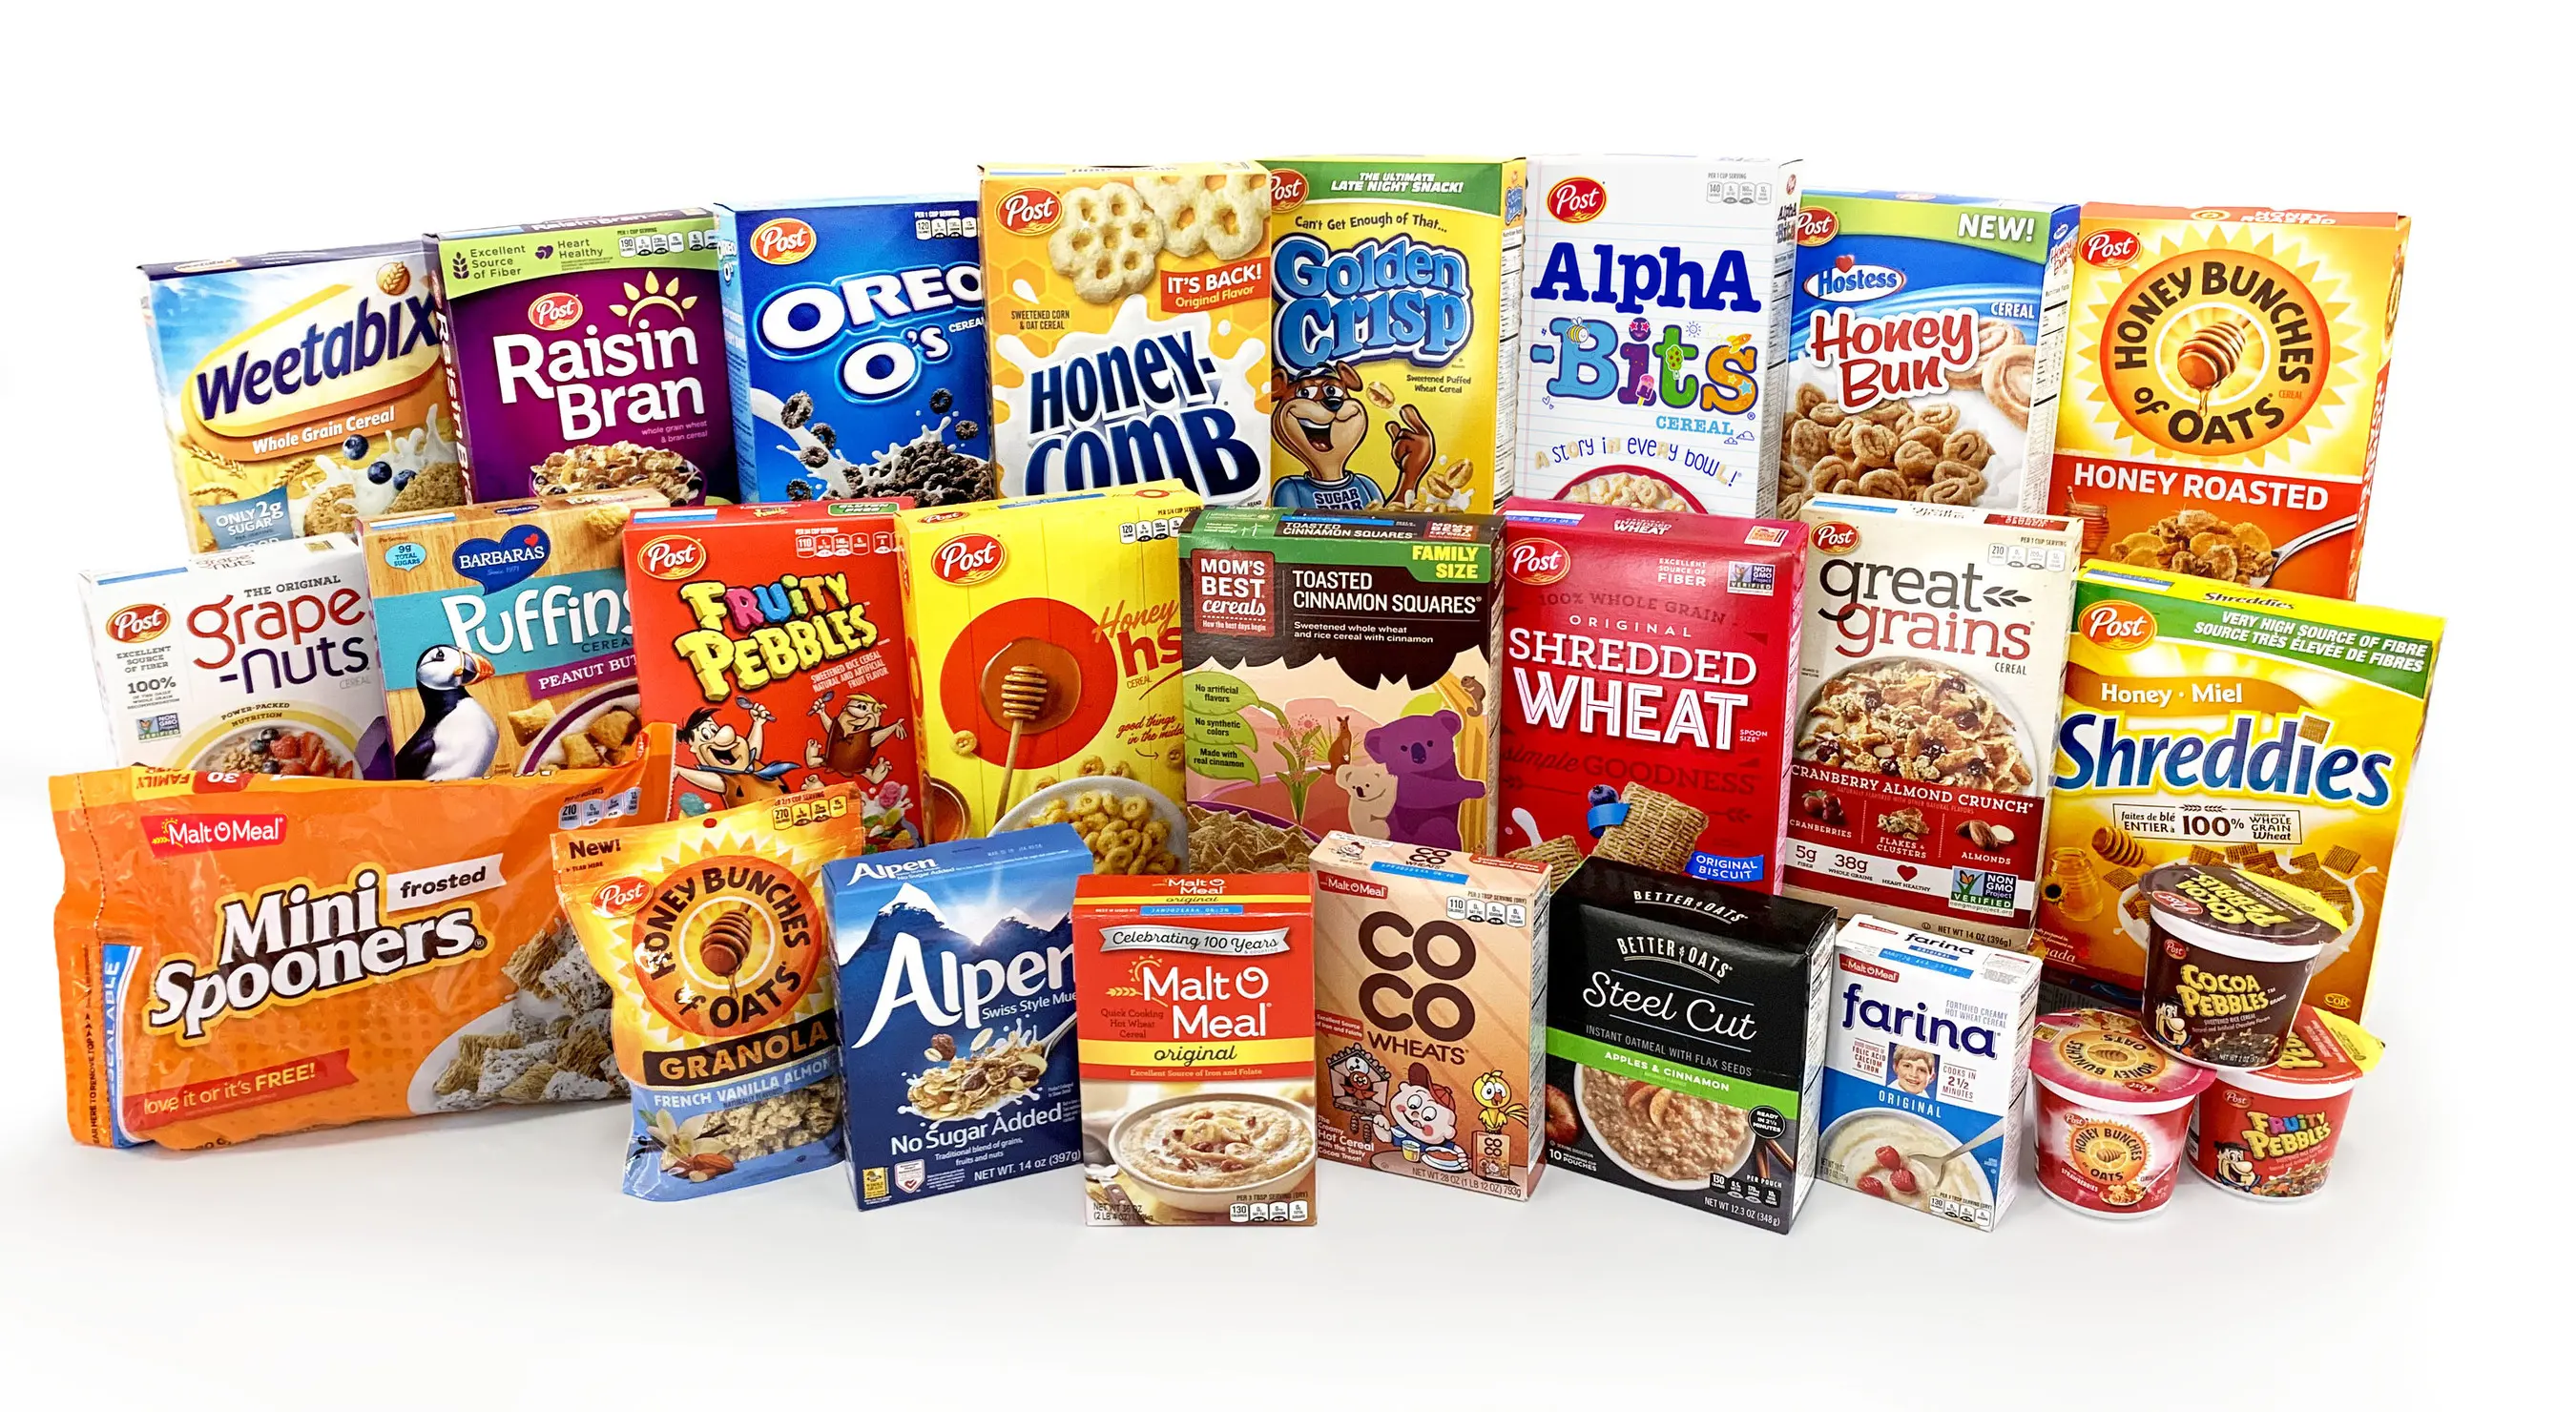 Group of cereals made by Post Consumer Brands